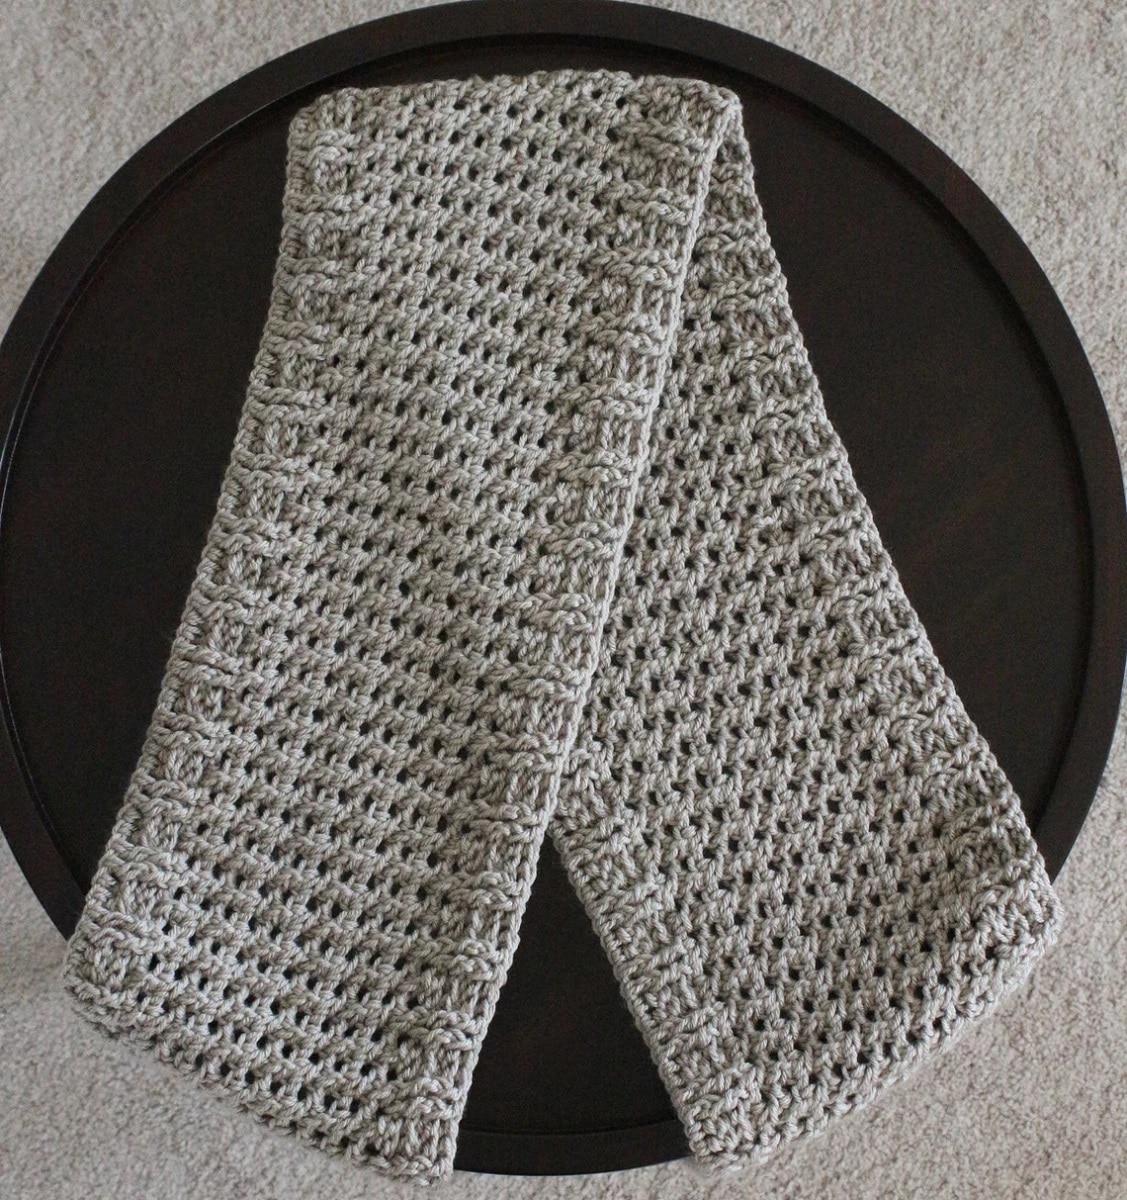 A light gray crochet scarf with a tight waffle stitch in the middle folded over on a black table.